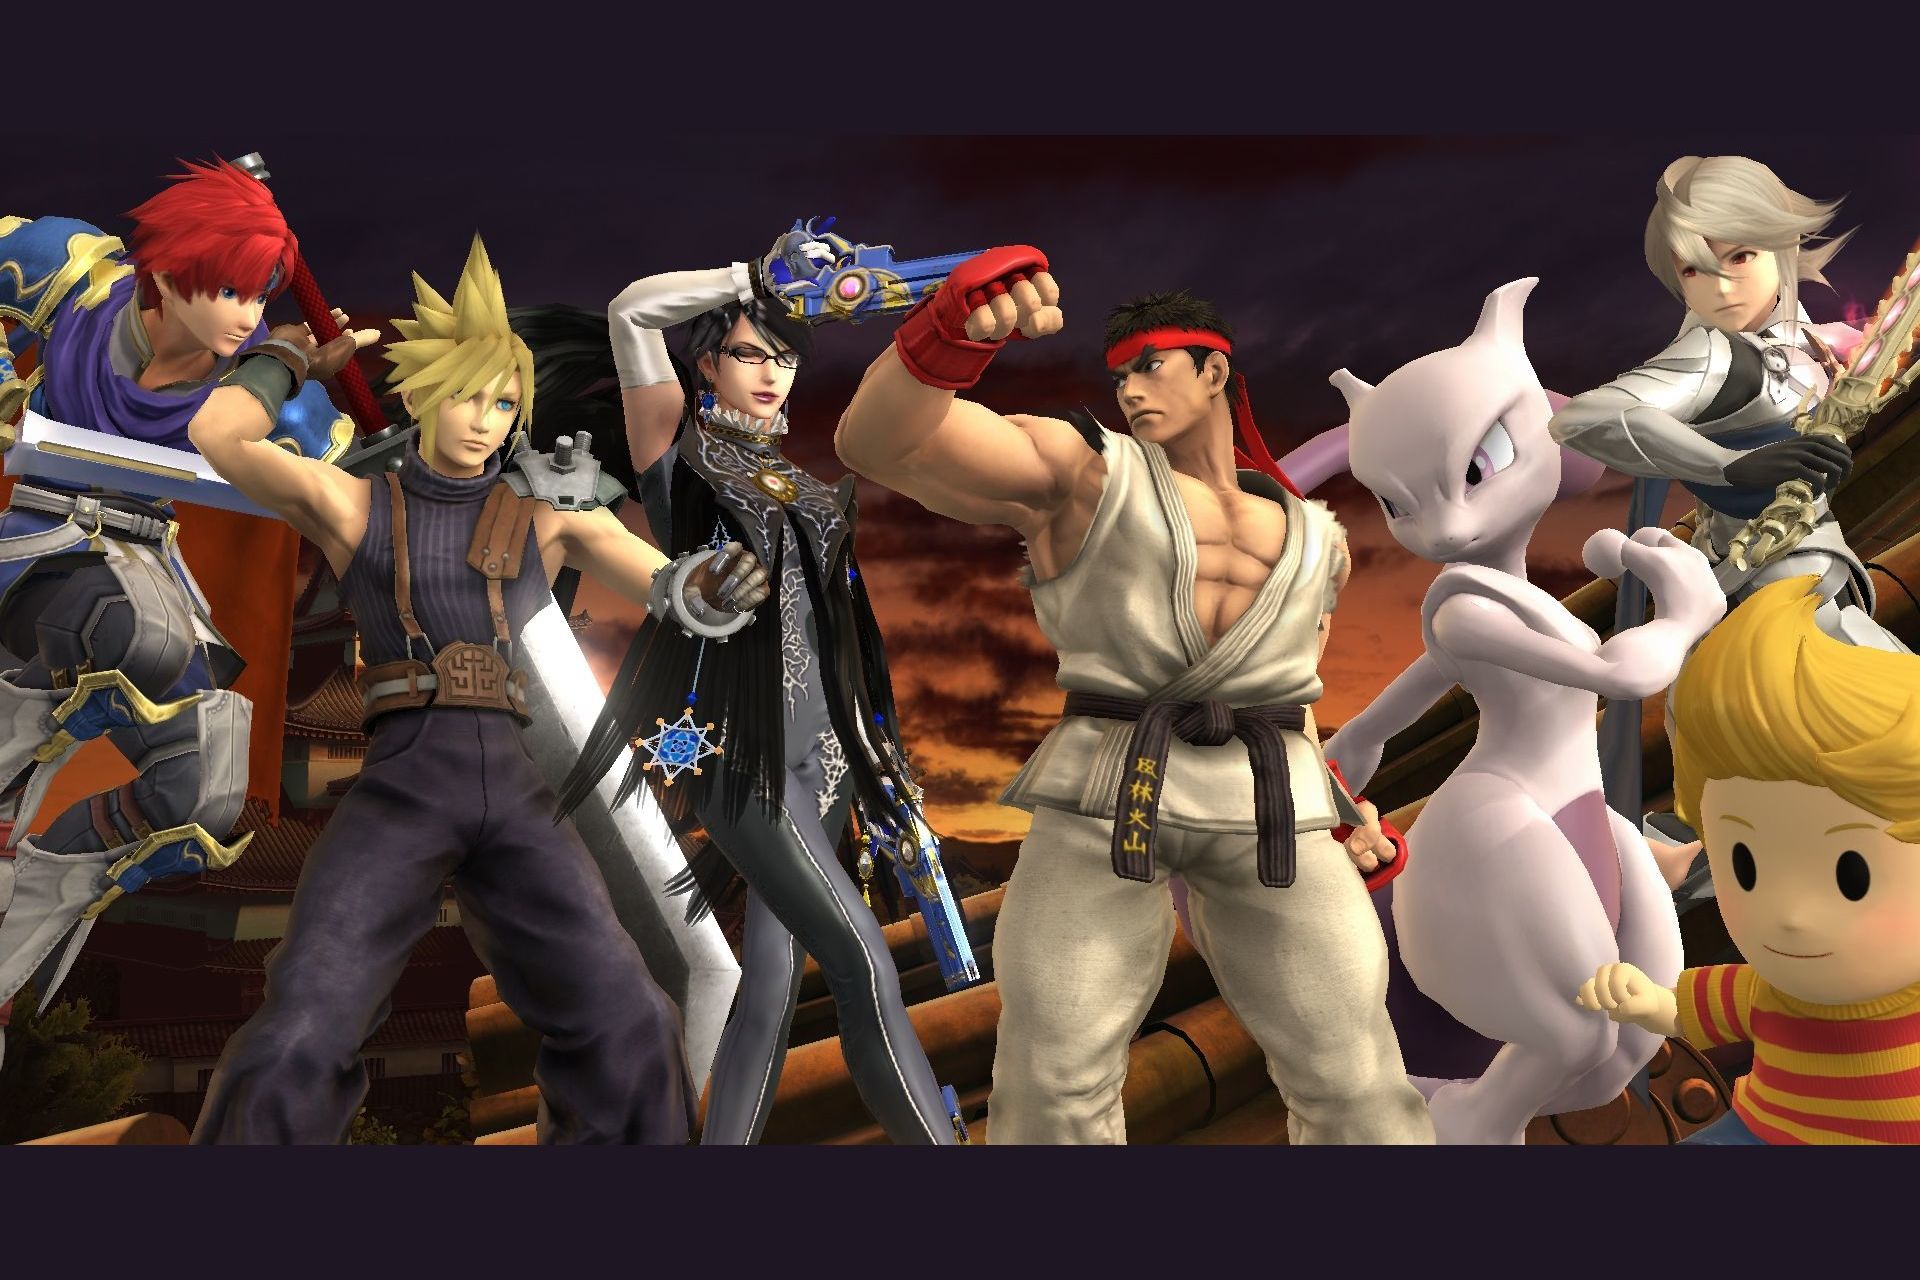 What Super Smash Bros DLC Character are you? 